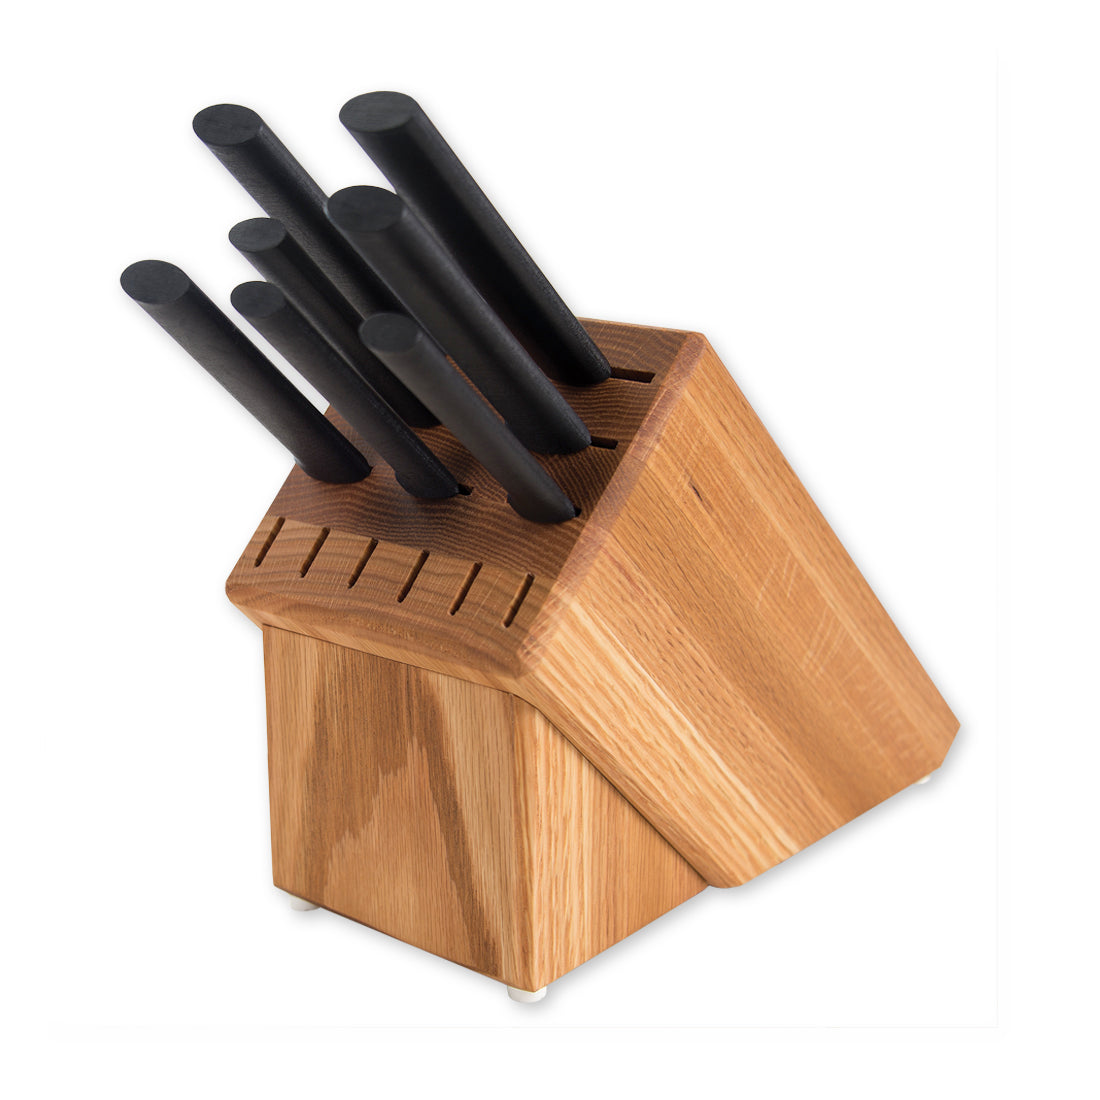 5-Piece Kitchen Set Black with Wood Red Resin Handle